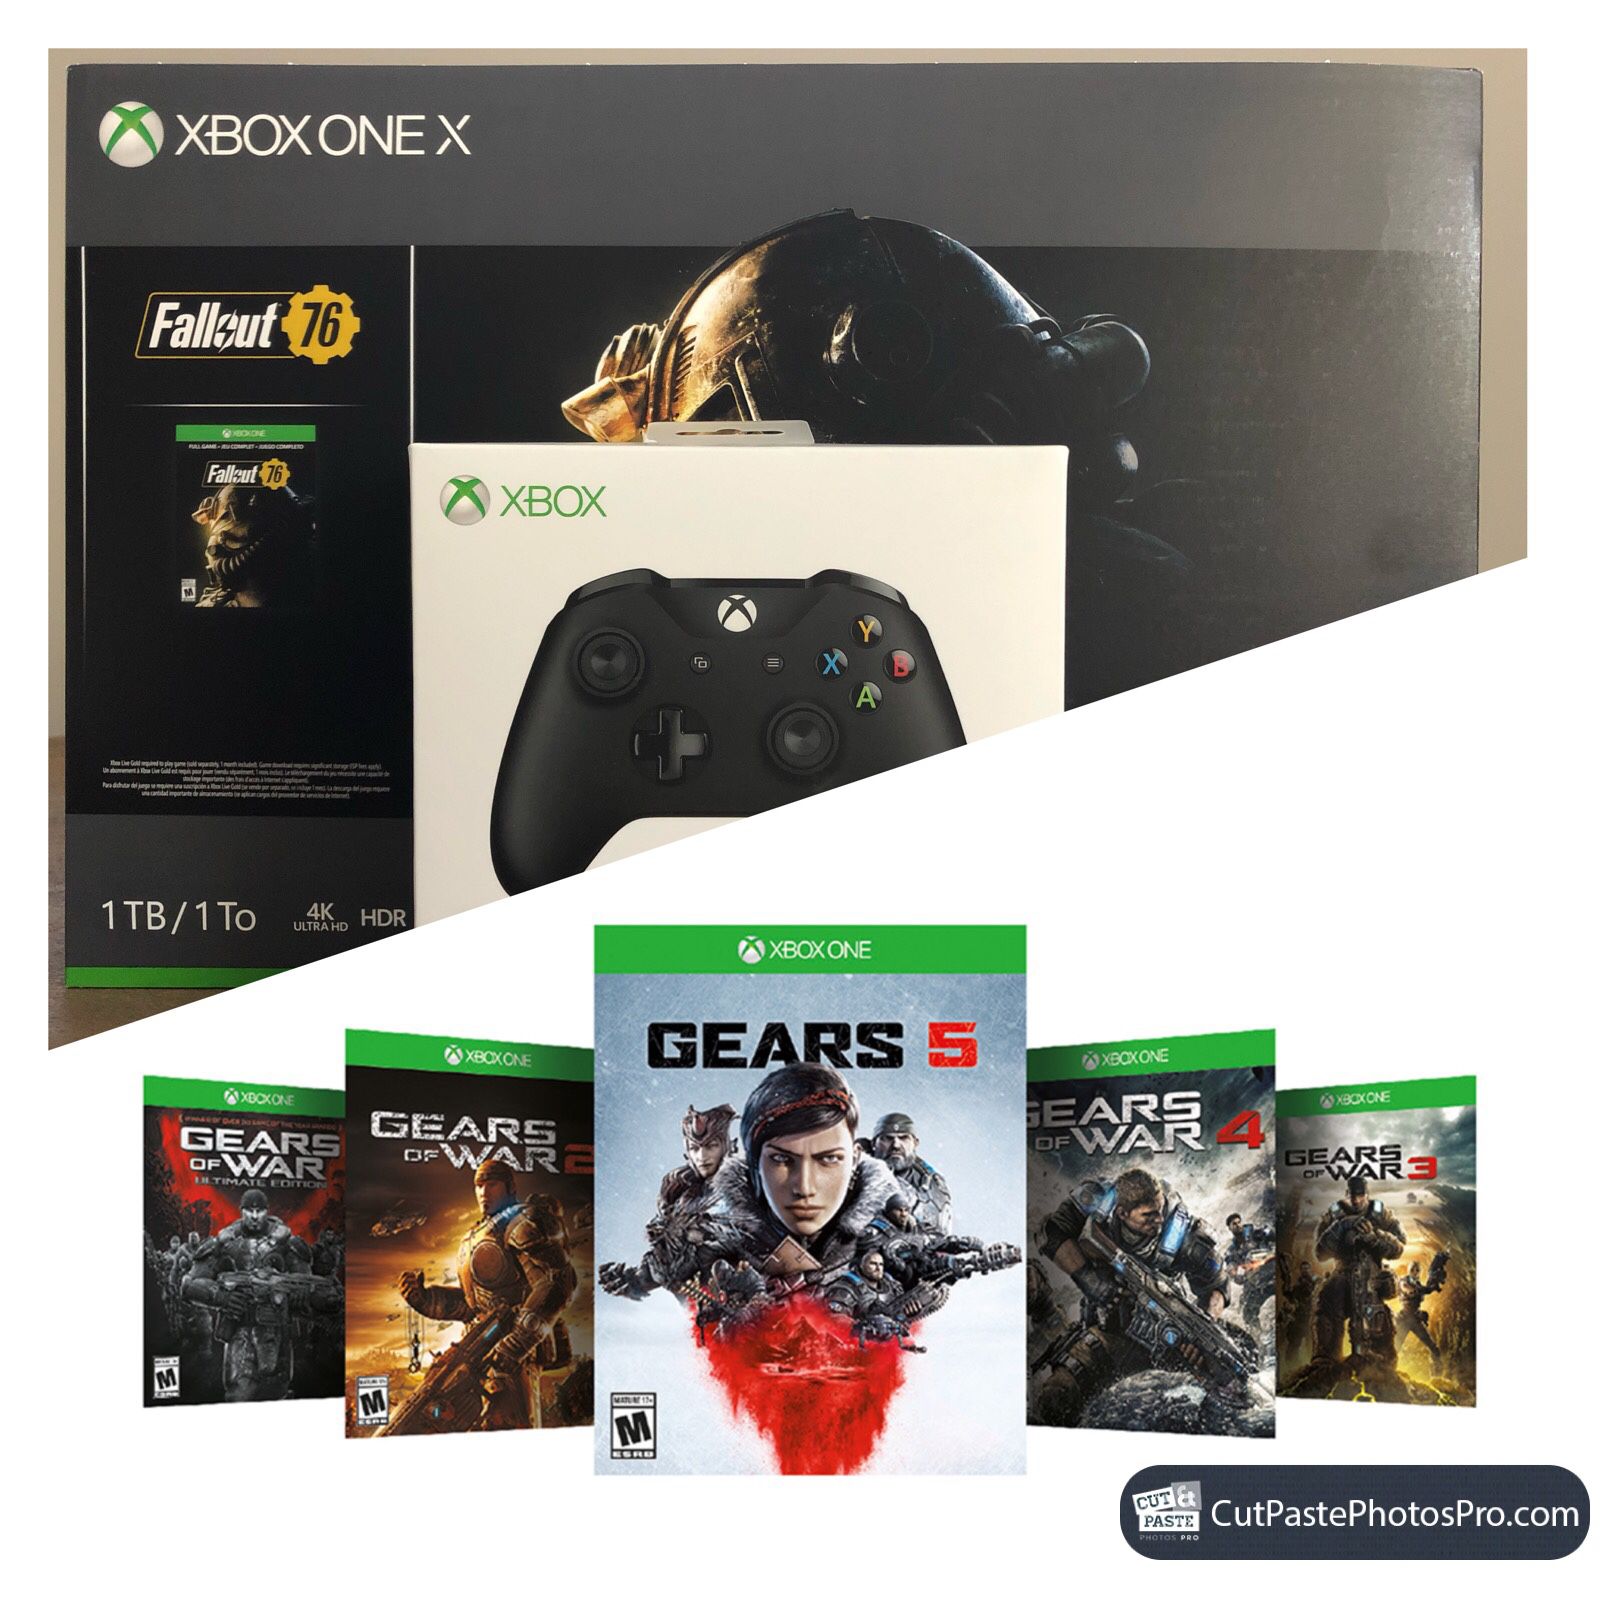 GEARS OF WAR 5 ULTIMATE- XBOX ONE X BUNDLE - GEARS OF WAR 1 - 5, XBOX ONE X SYSTEM, 2 CONTROLLERS